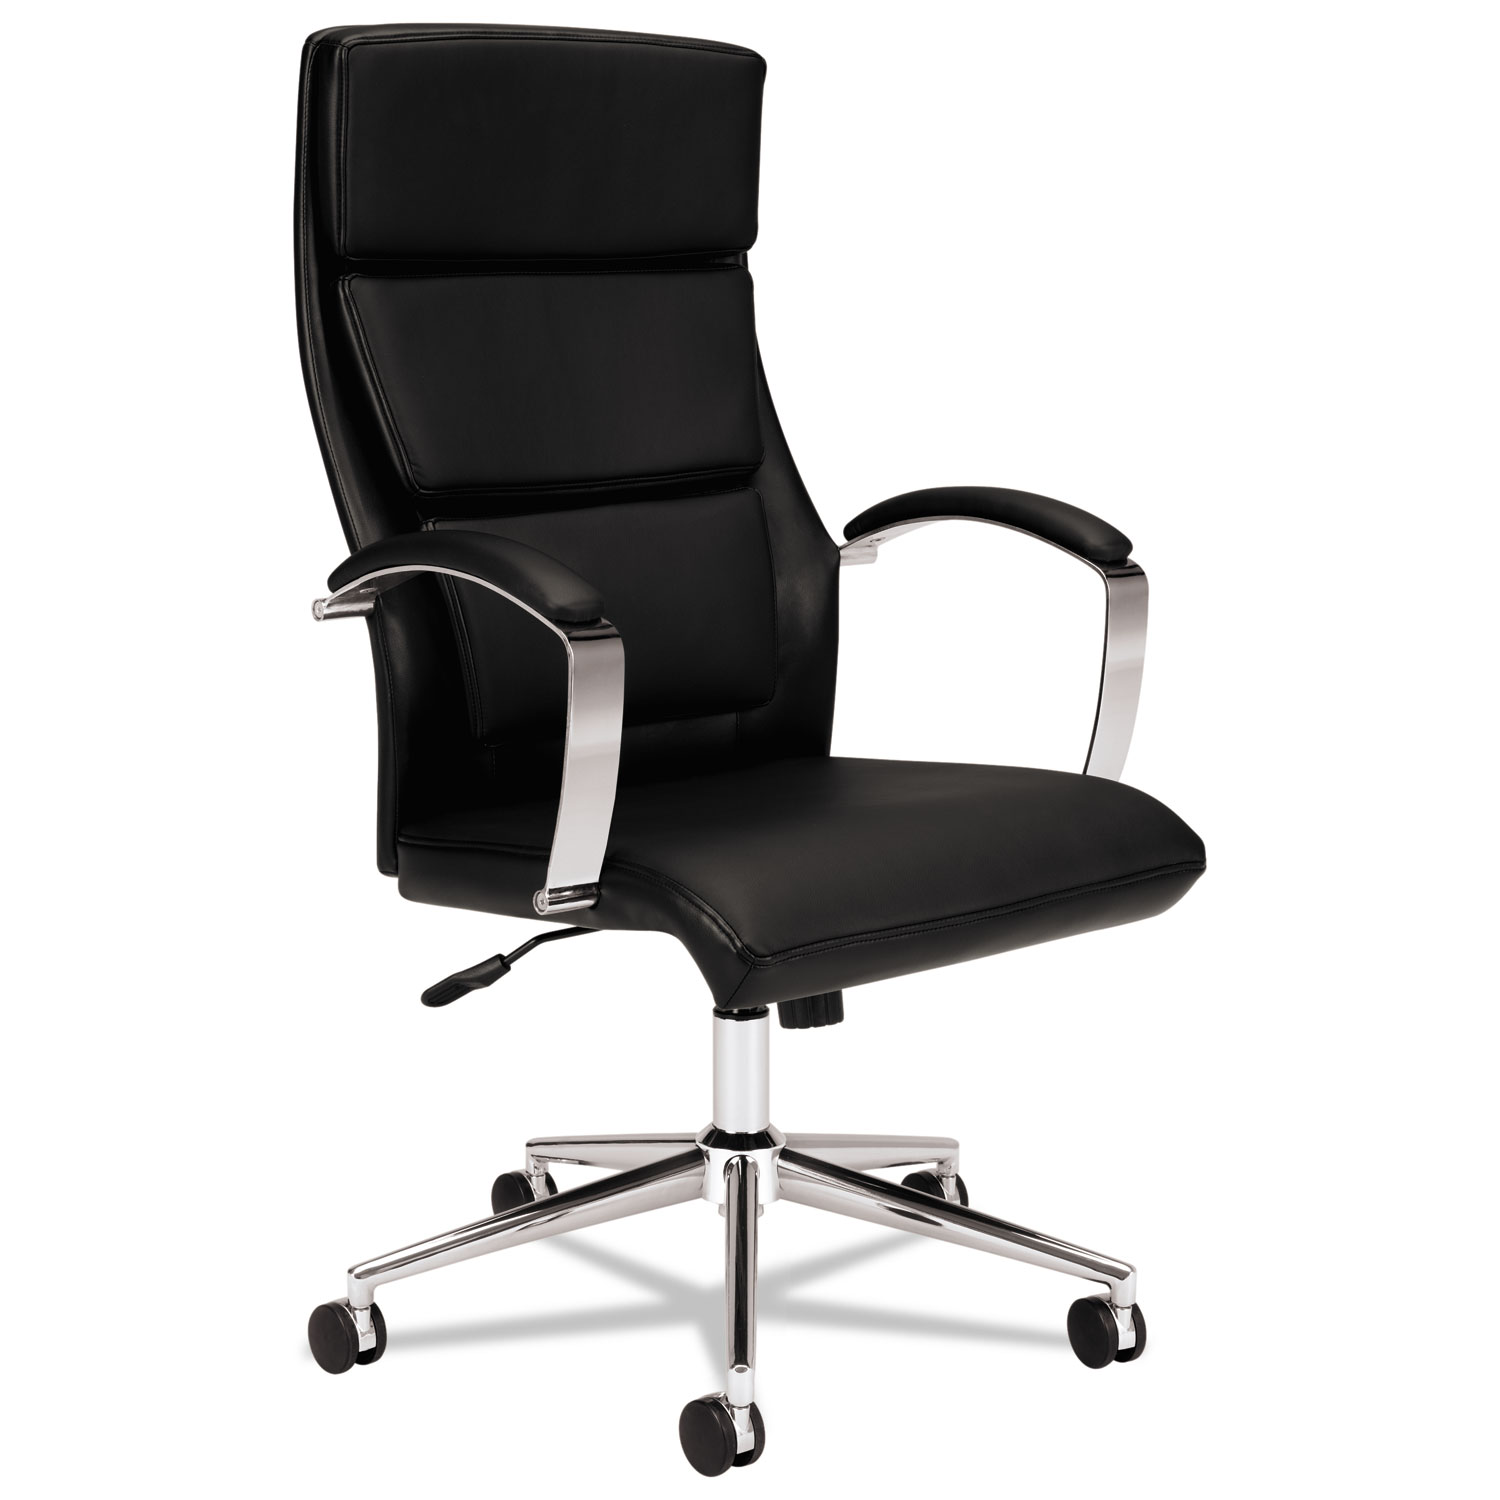  HON HVL105.SB11 HVL105 Executive High-Back Leather Chair, Supports up to 250 lbs., Black Seat/Black Back, Polished Aluminum Base (BSXVL105SB11) 